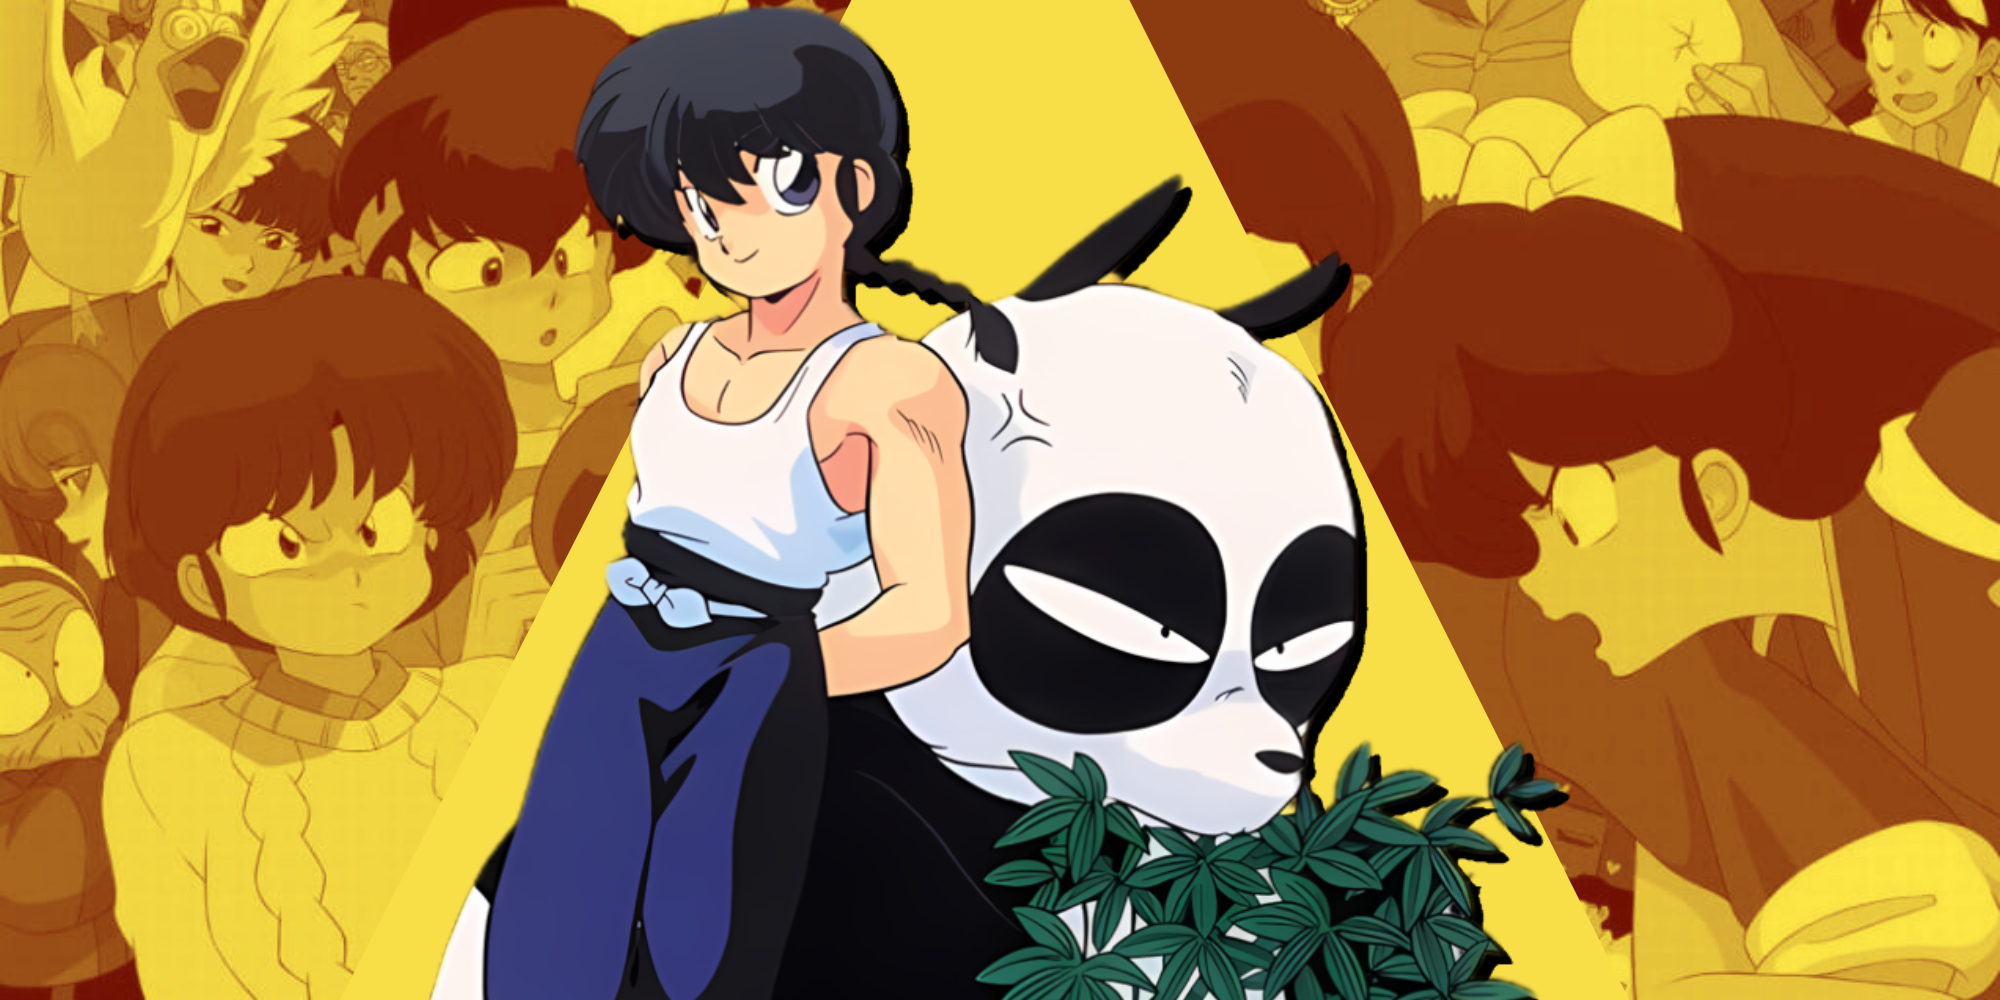 Custom Image of Ranma and Genma Saotome in the center with the cast of Ranma 12 in the background